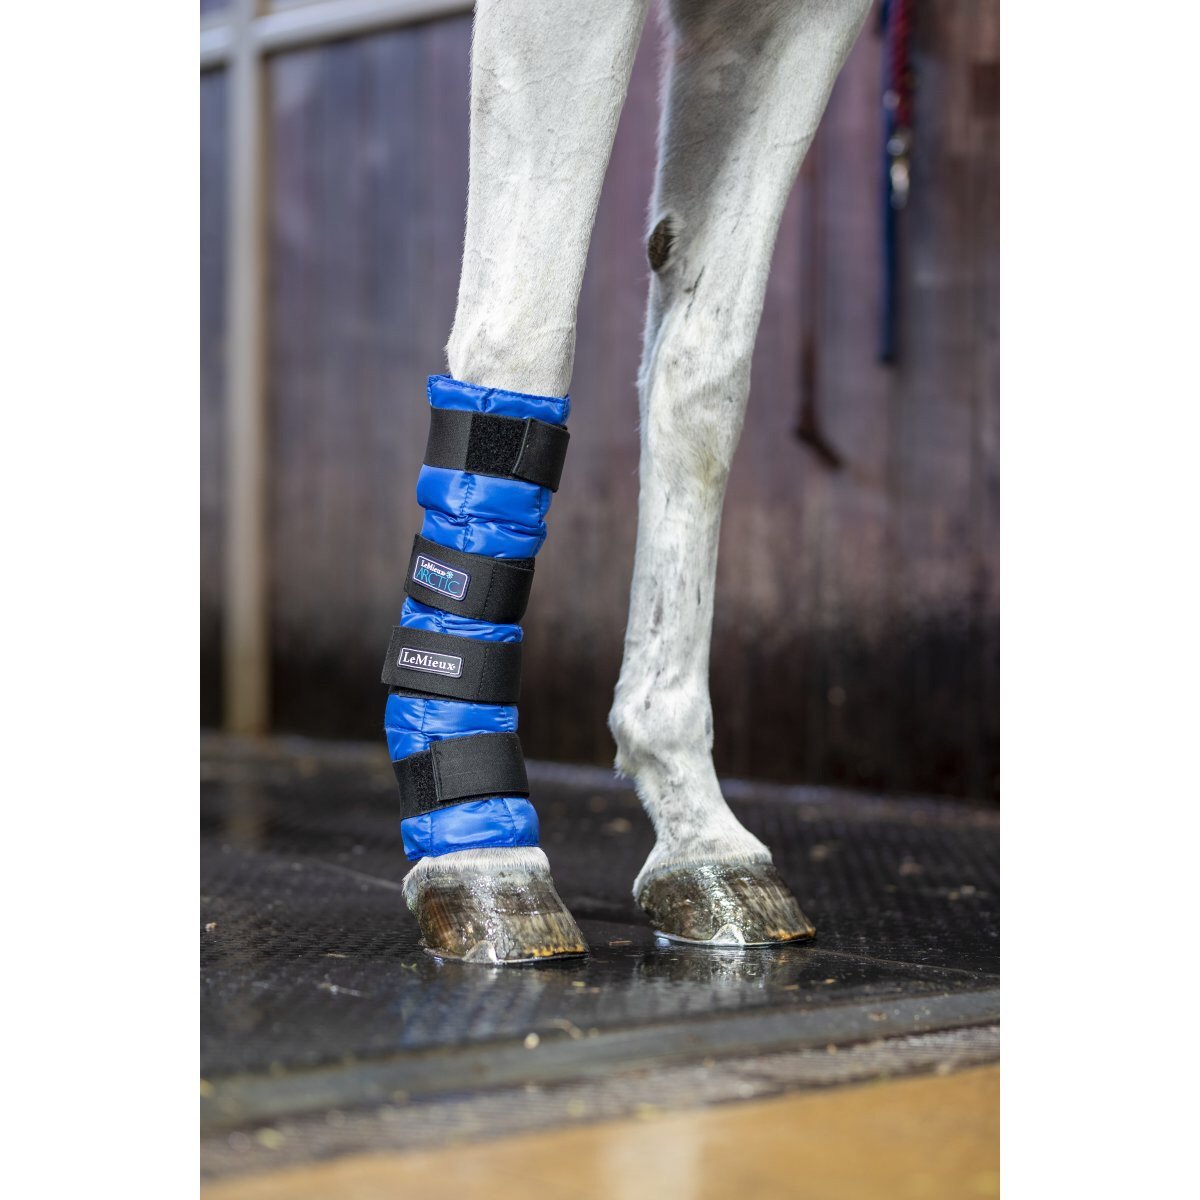 LeMieux Arctic Ice Boots (Now Sold in Pairs)-Southern Sport Horses-The Equestrian